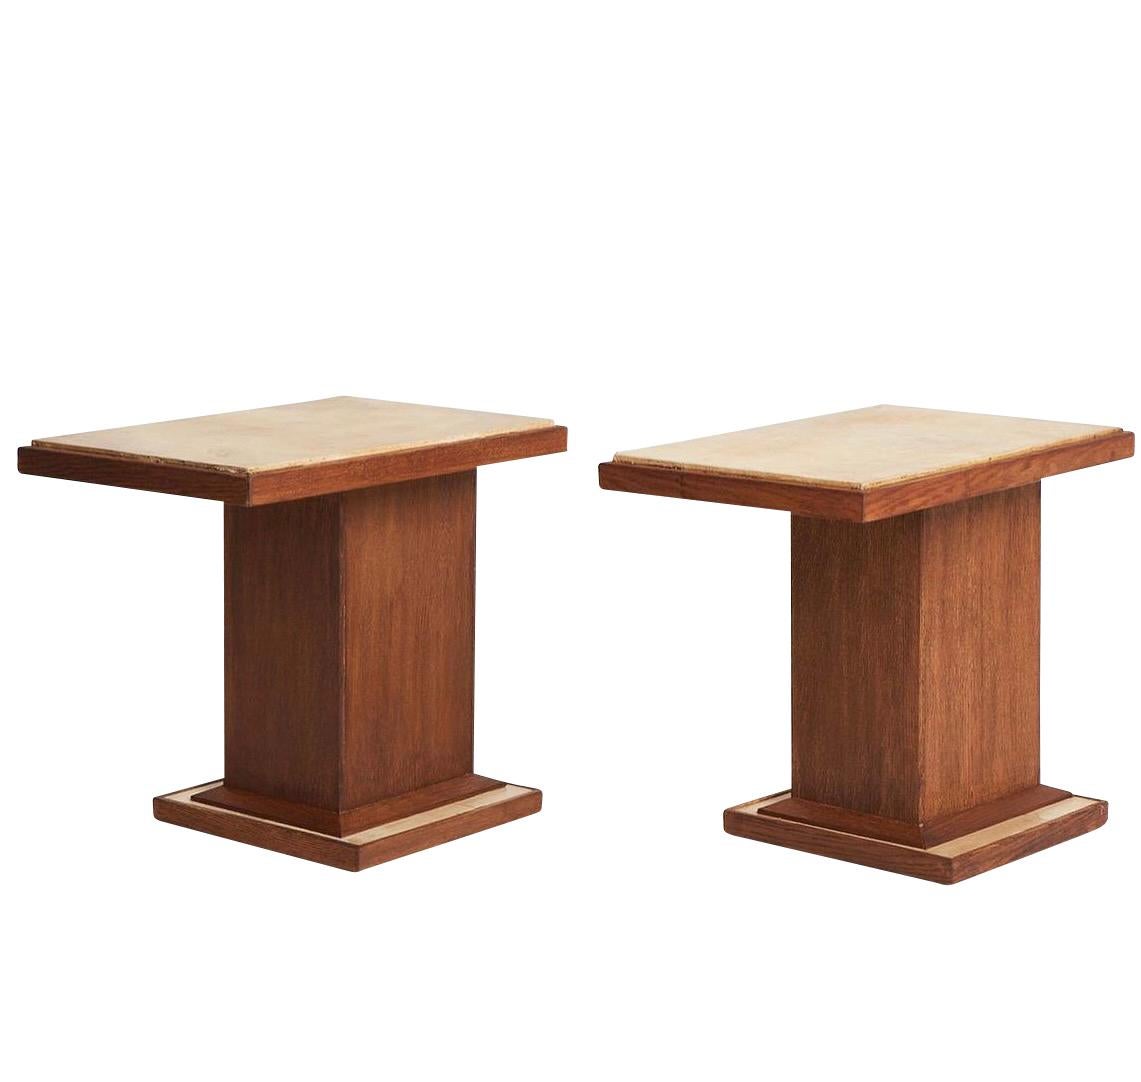 1940s French pair of vellum and oak side tables in the style of Paul - Dupre Lafor.
Can be placed vertically or horizontally.